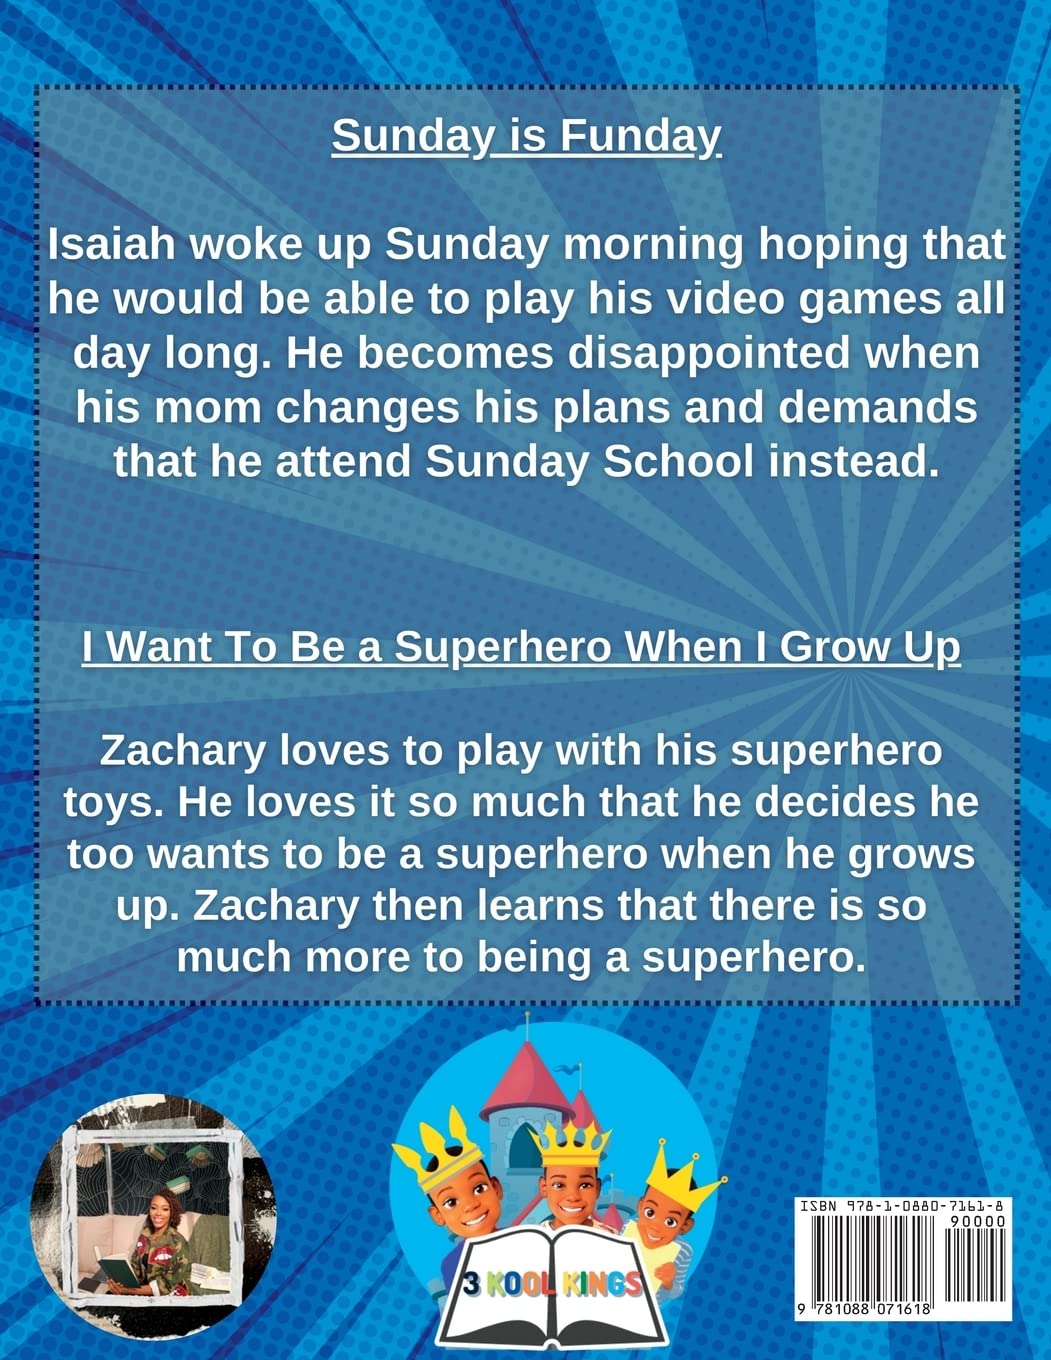 Sunday Is Funday & I Want To Be a Superhero When I Grow Up | Two Stories In One eBook (Paperback)